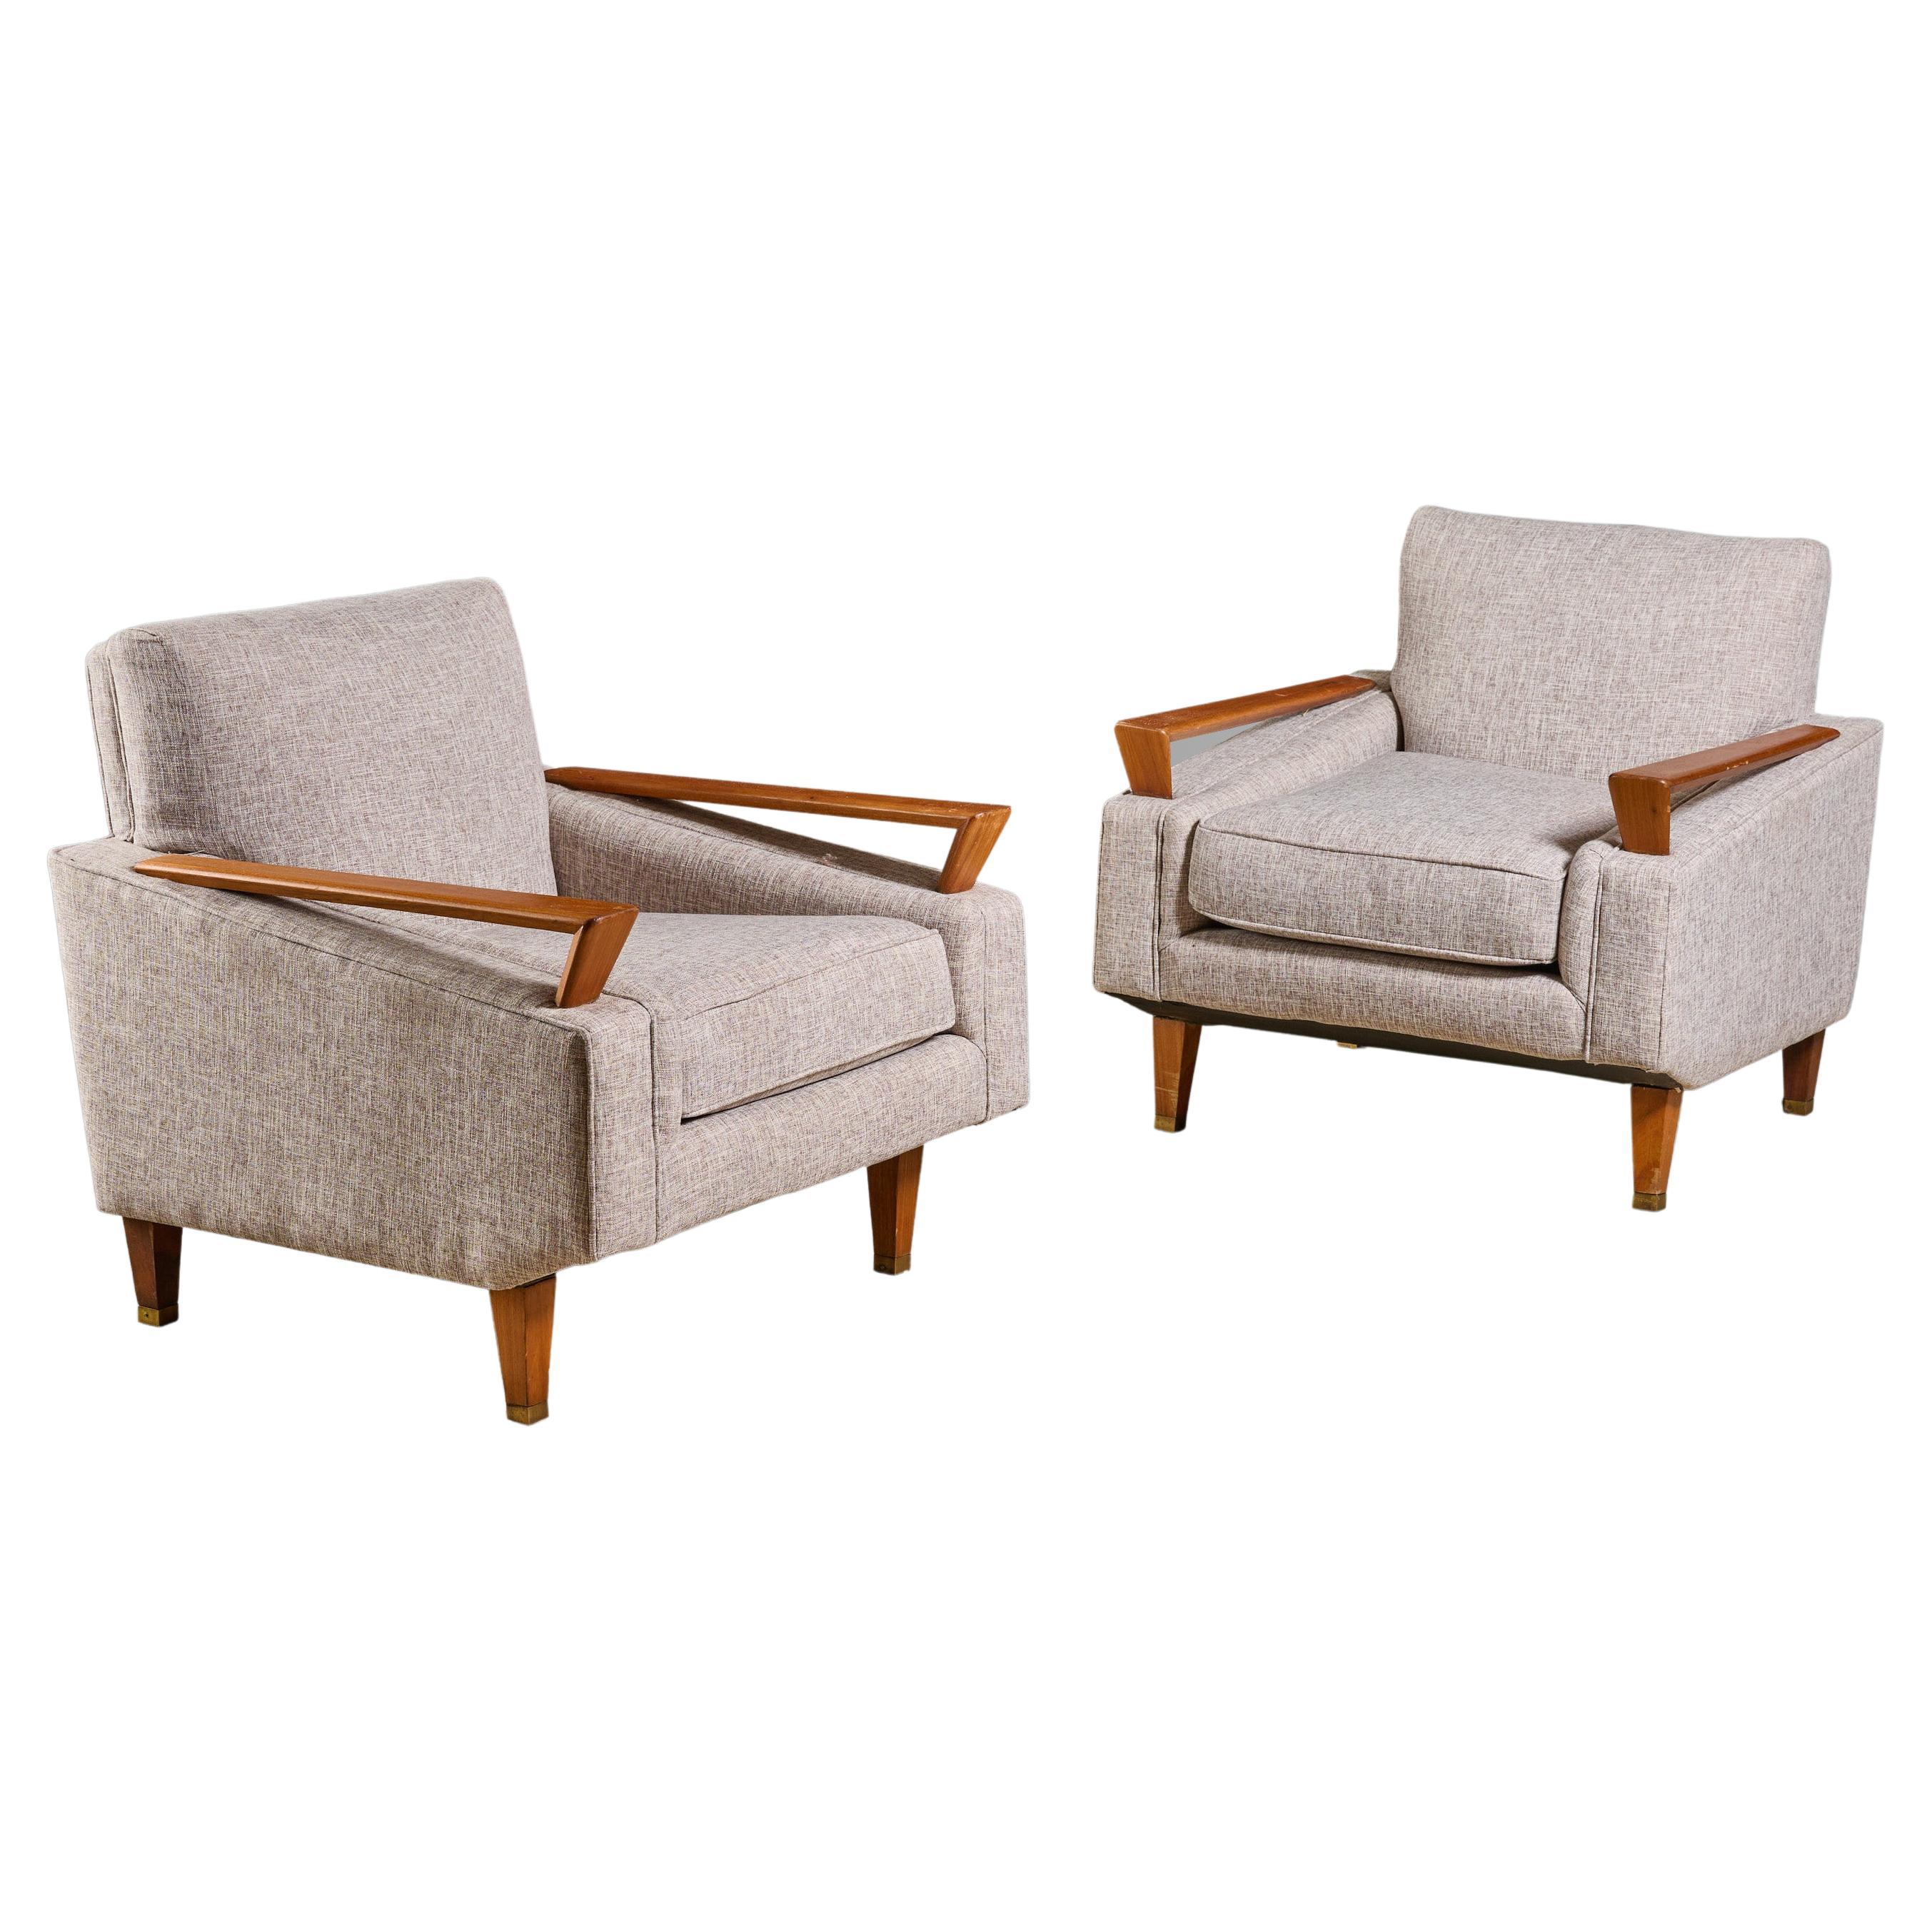 Pair of Mid-Century Upholstered Chairs For Sale